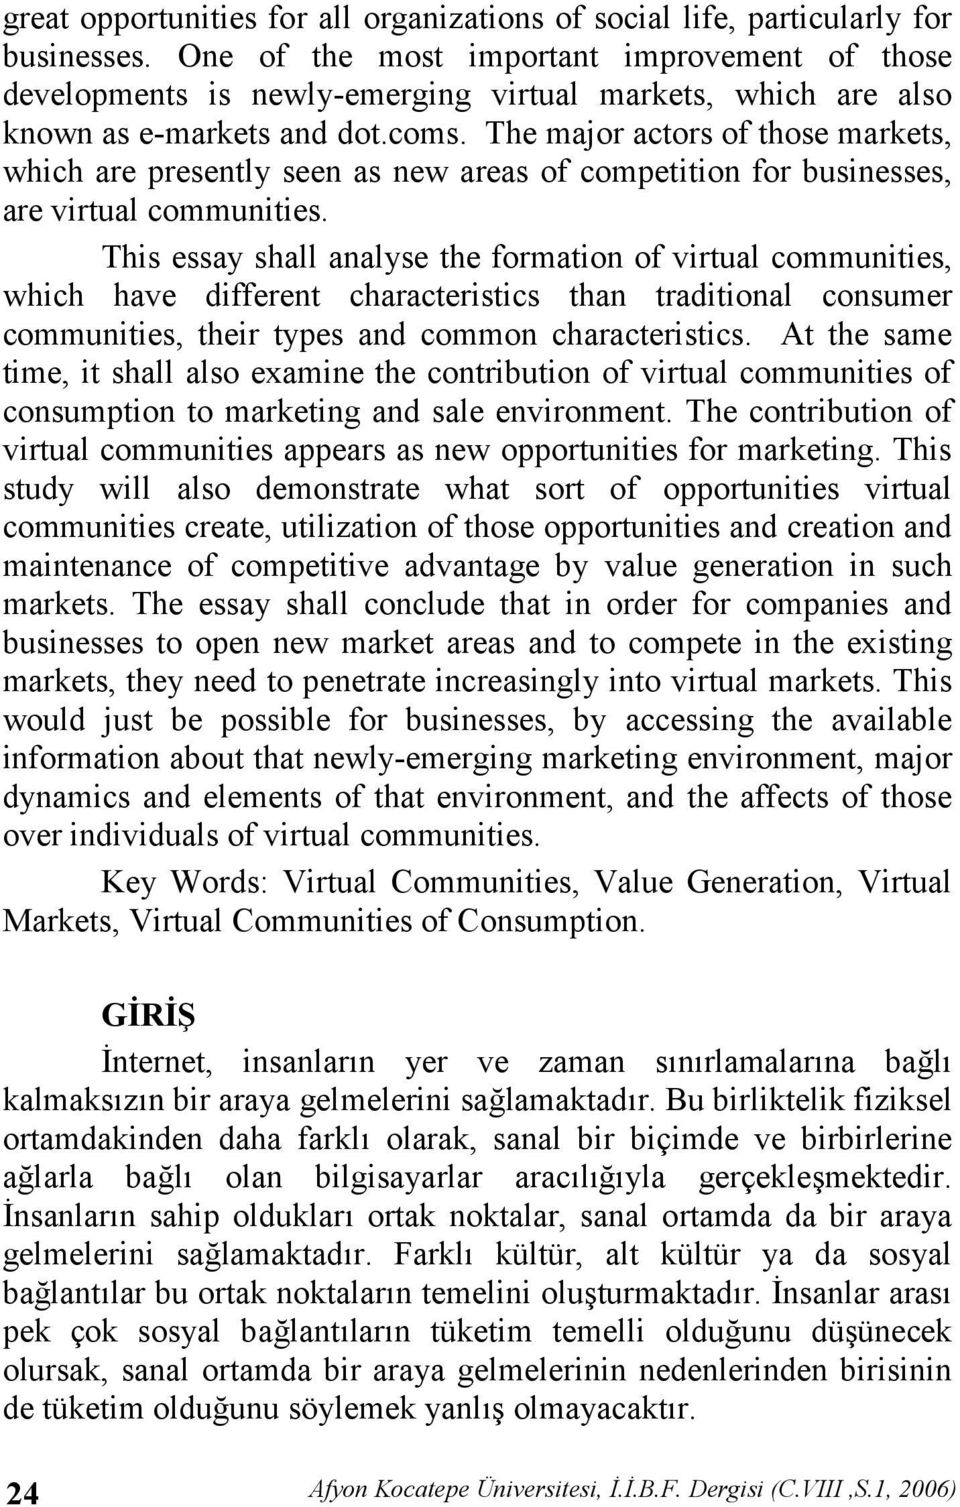 The major actors of those markets, which are presently seen as new areas of competition for businesses, are virtual communities.